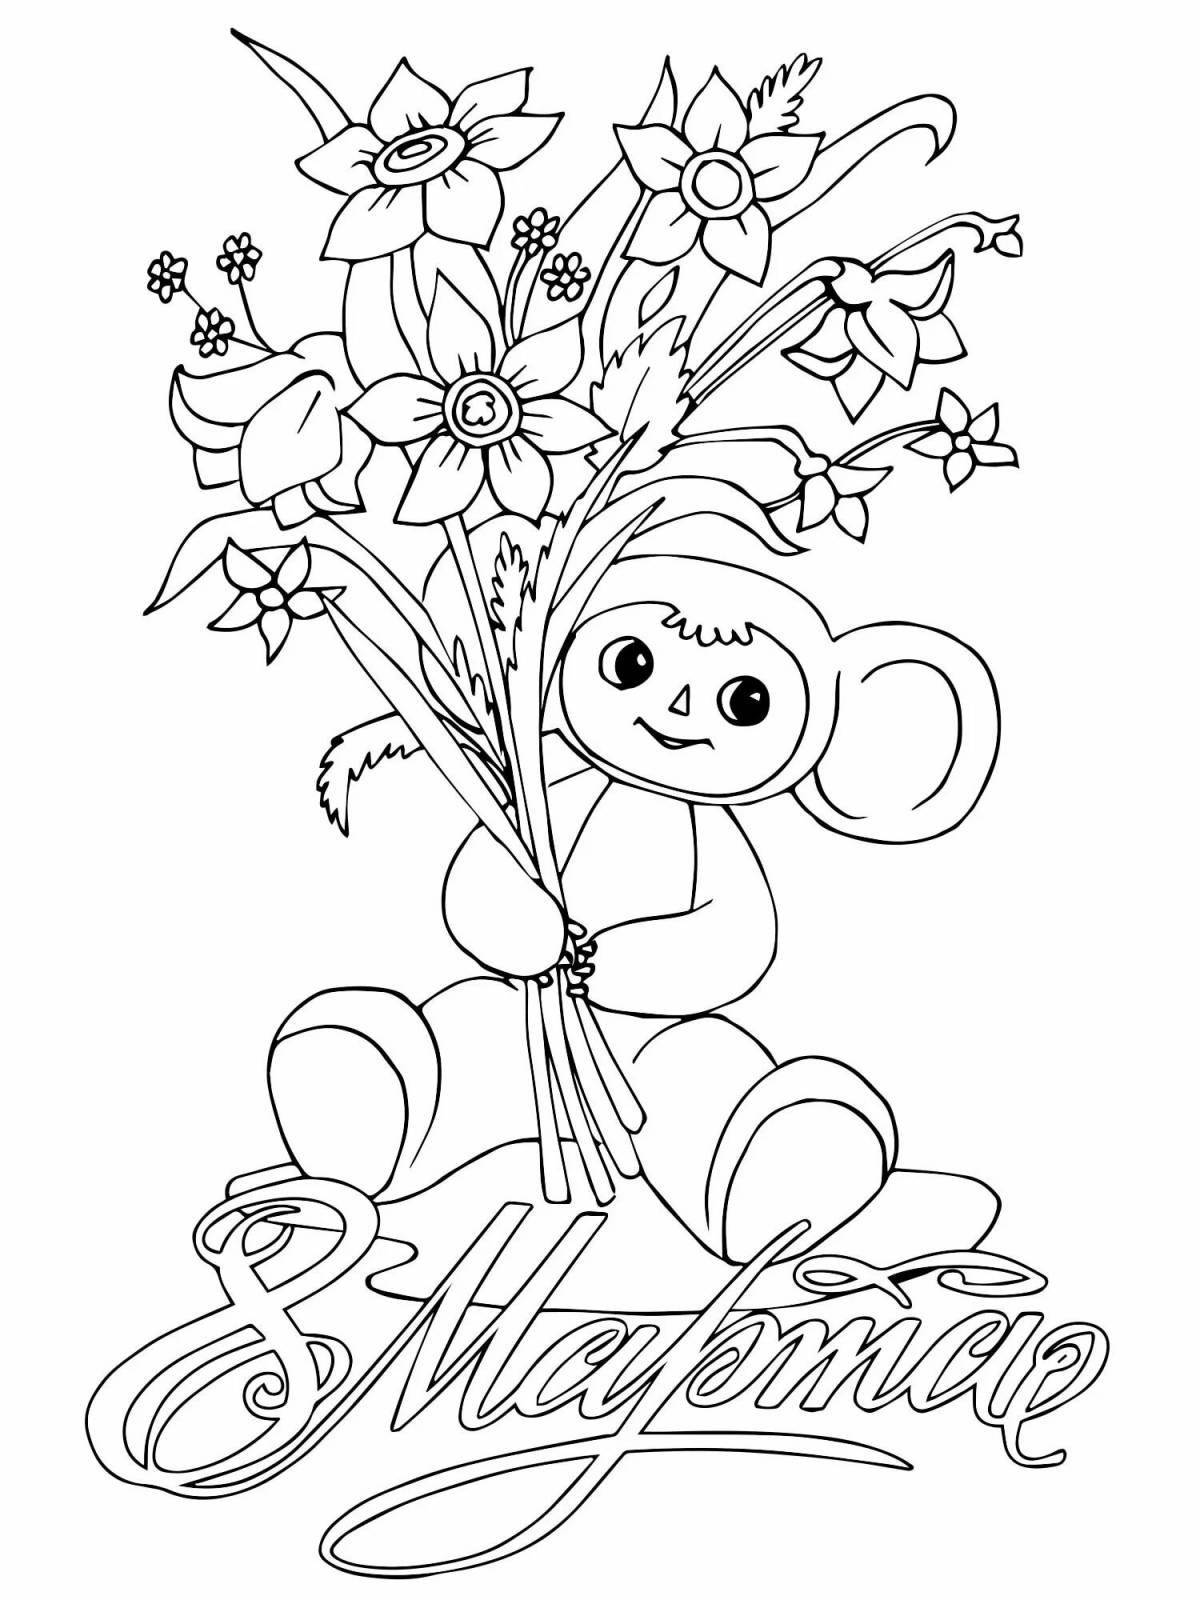 Brilliant March 8 coloring pages for girls